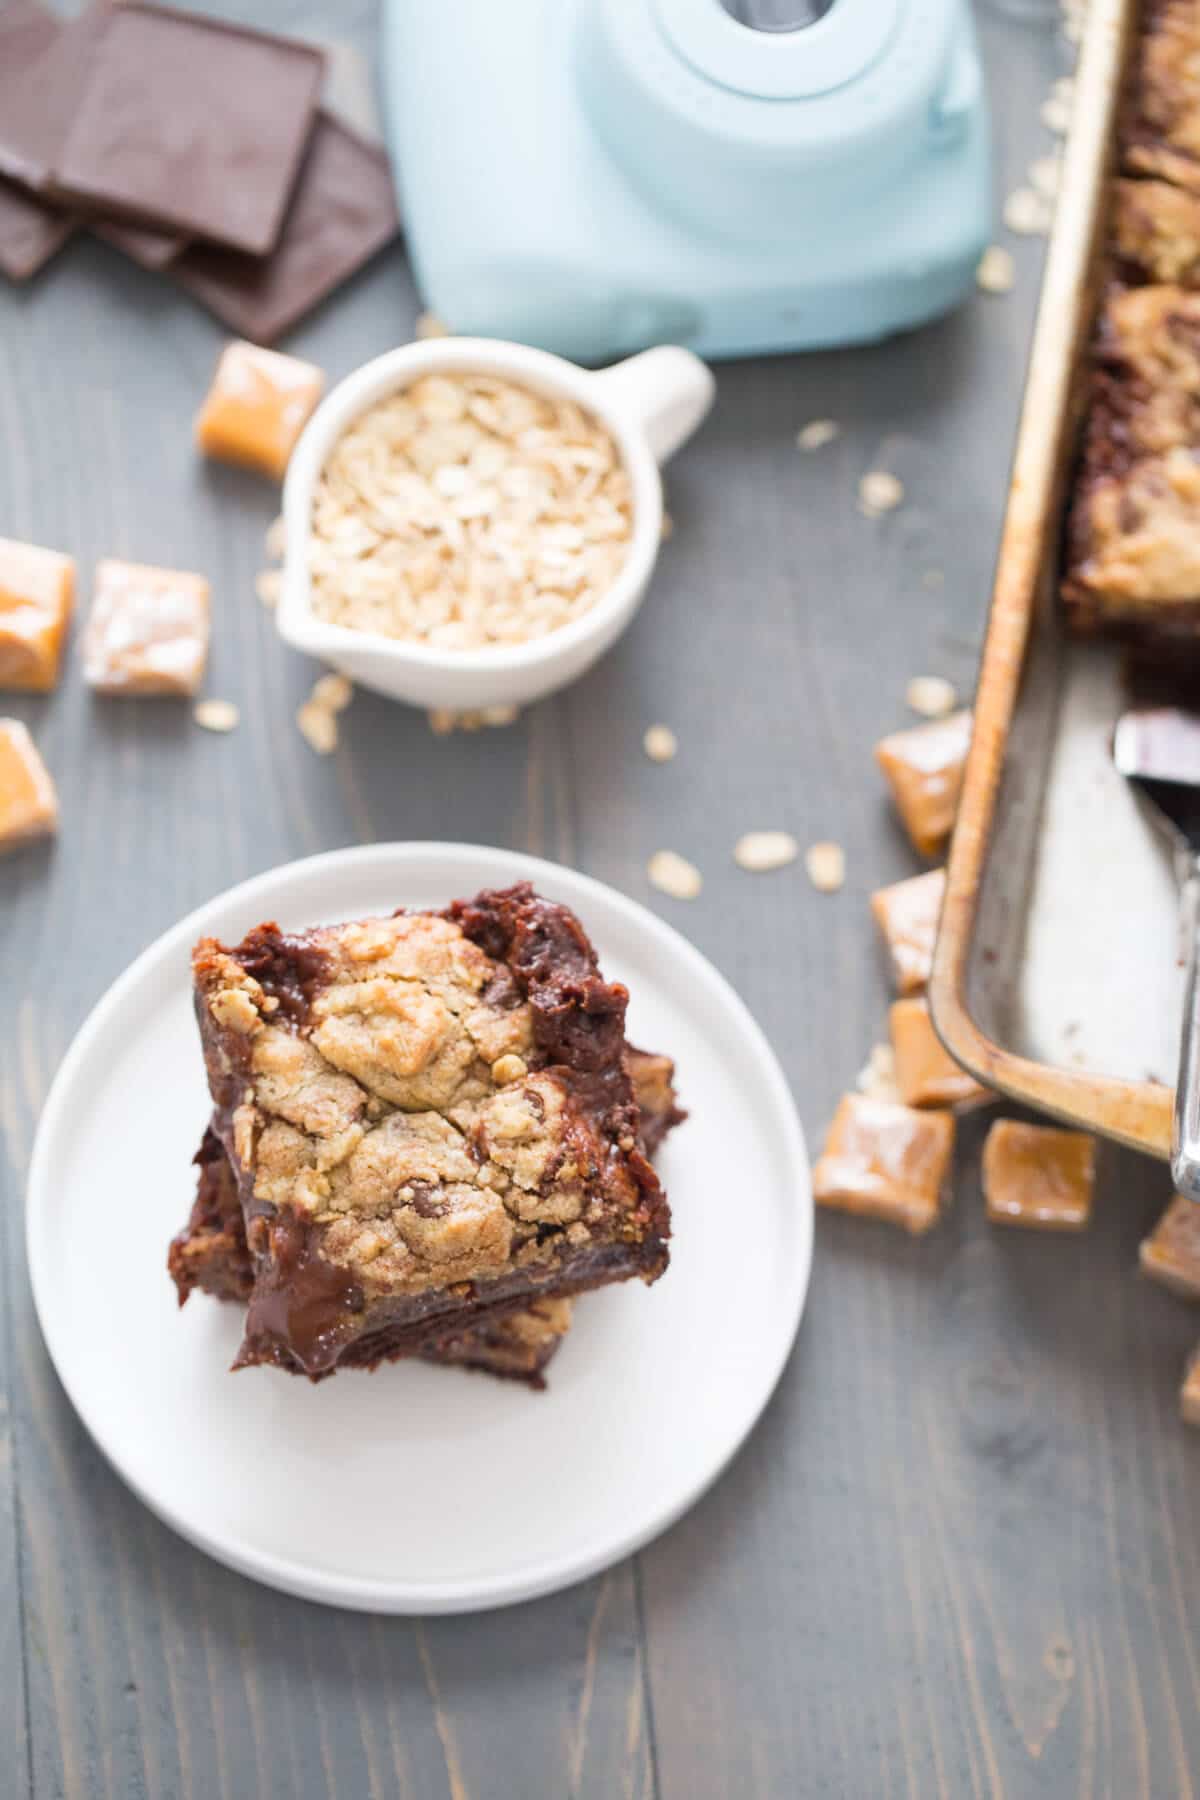 Brookie bars are so easy and delicious, but when you add a caramel filling, they become amazing!